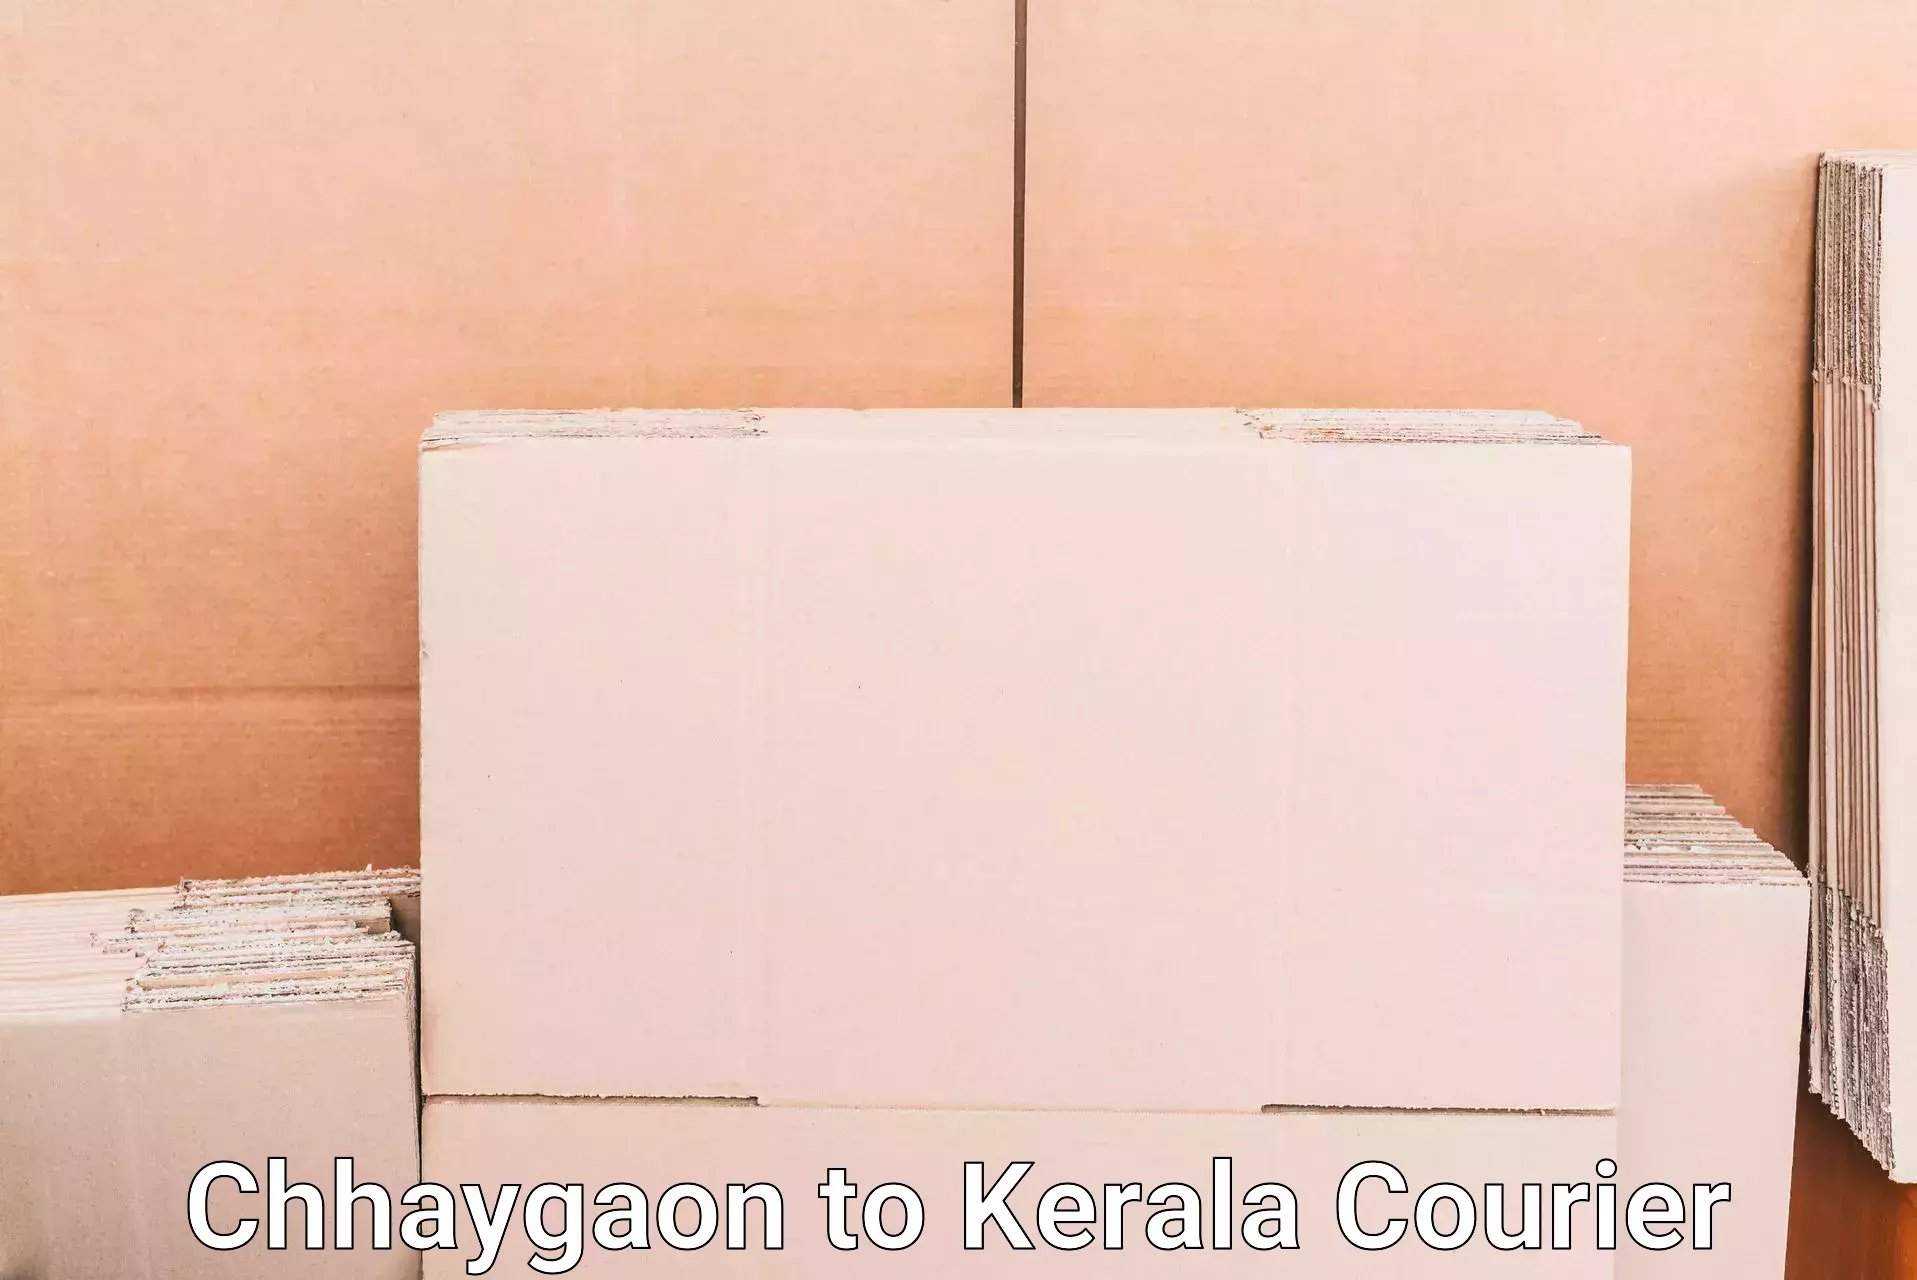 Luggage transport company Chhaygaon to Kannur